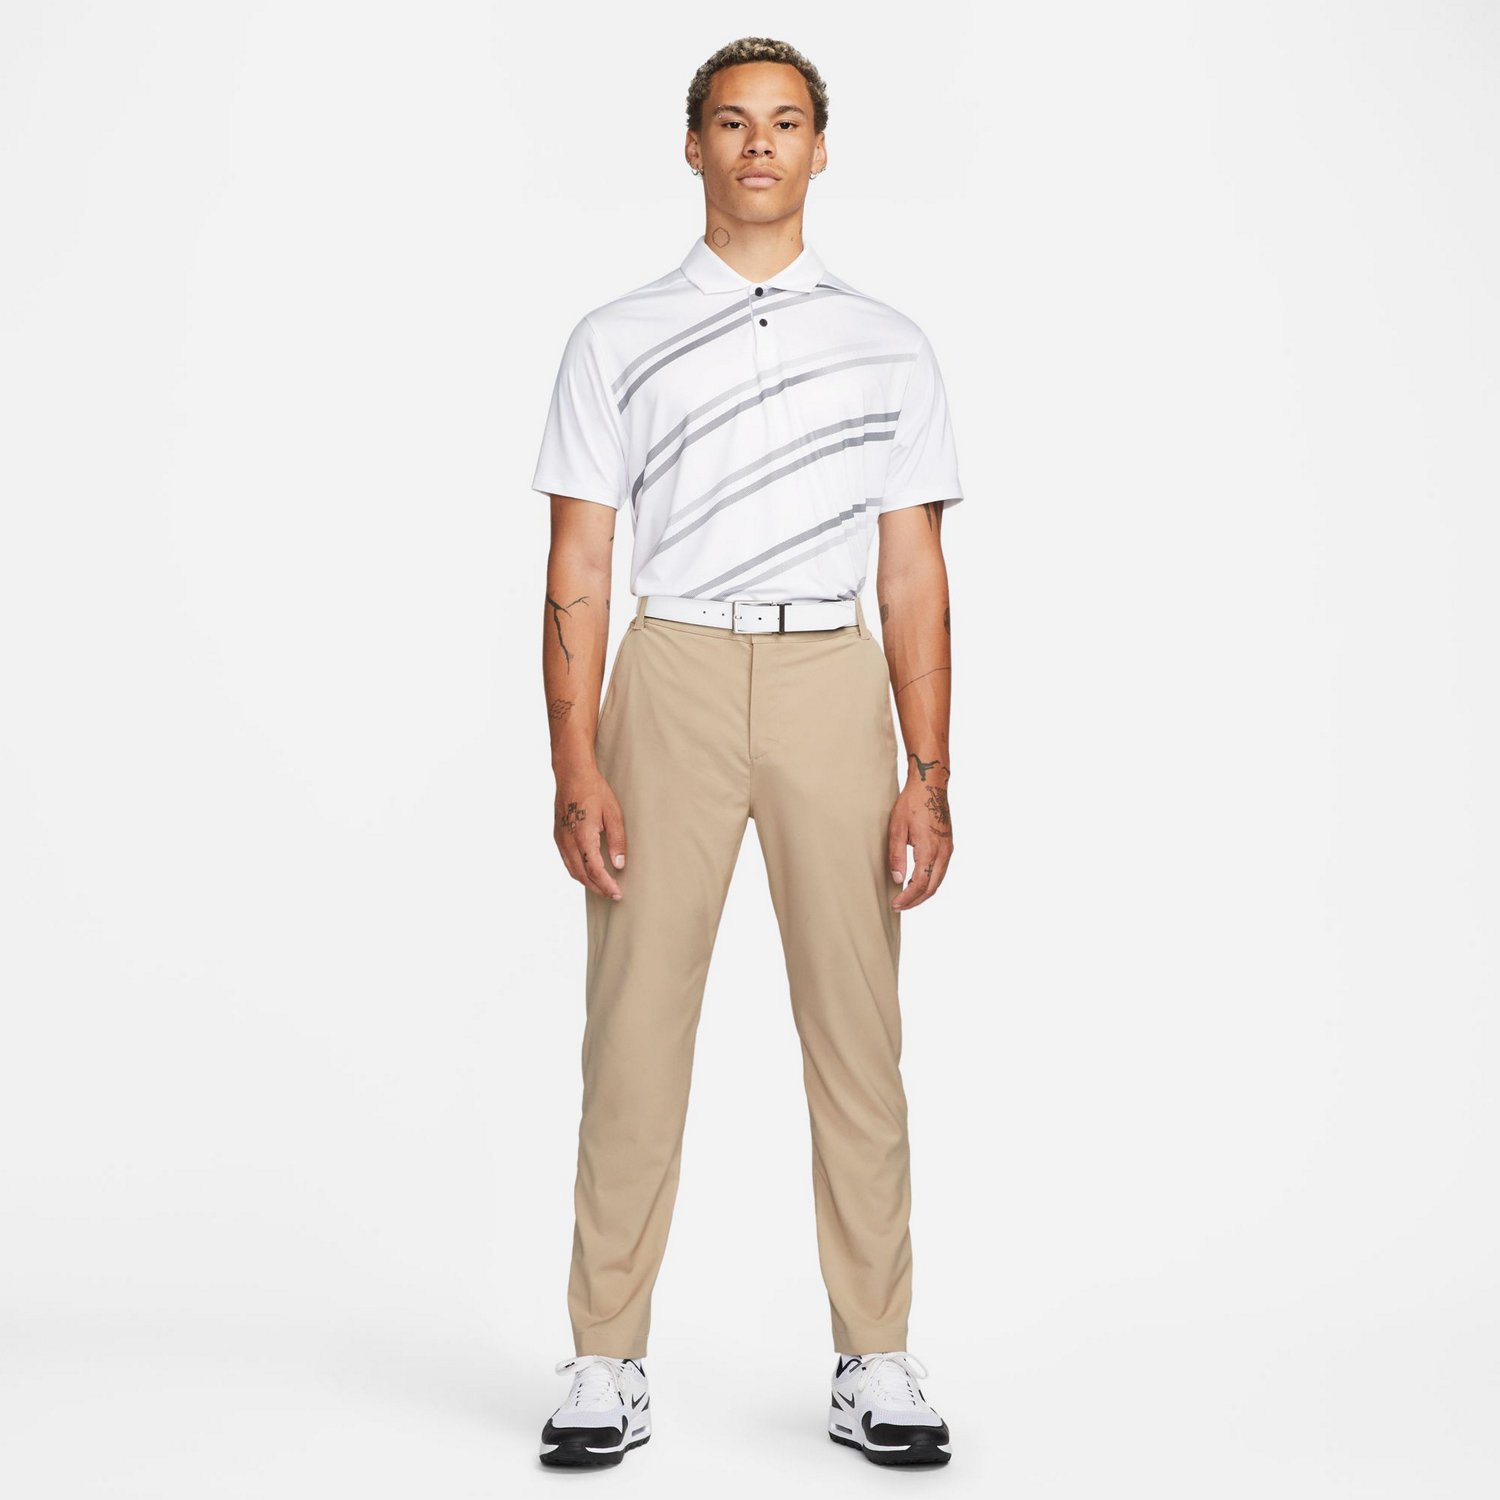 Nike Men's Dri-FIT Victory Pants | Free Shipping at Academy